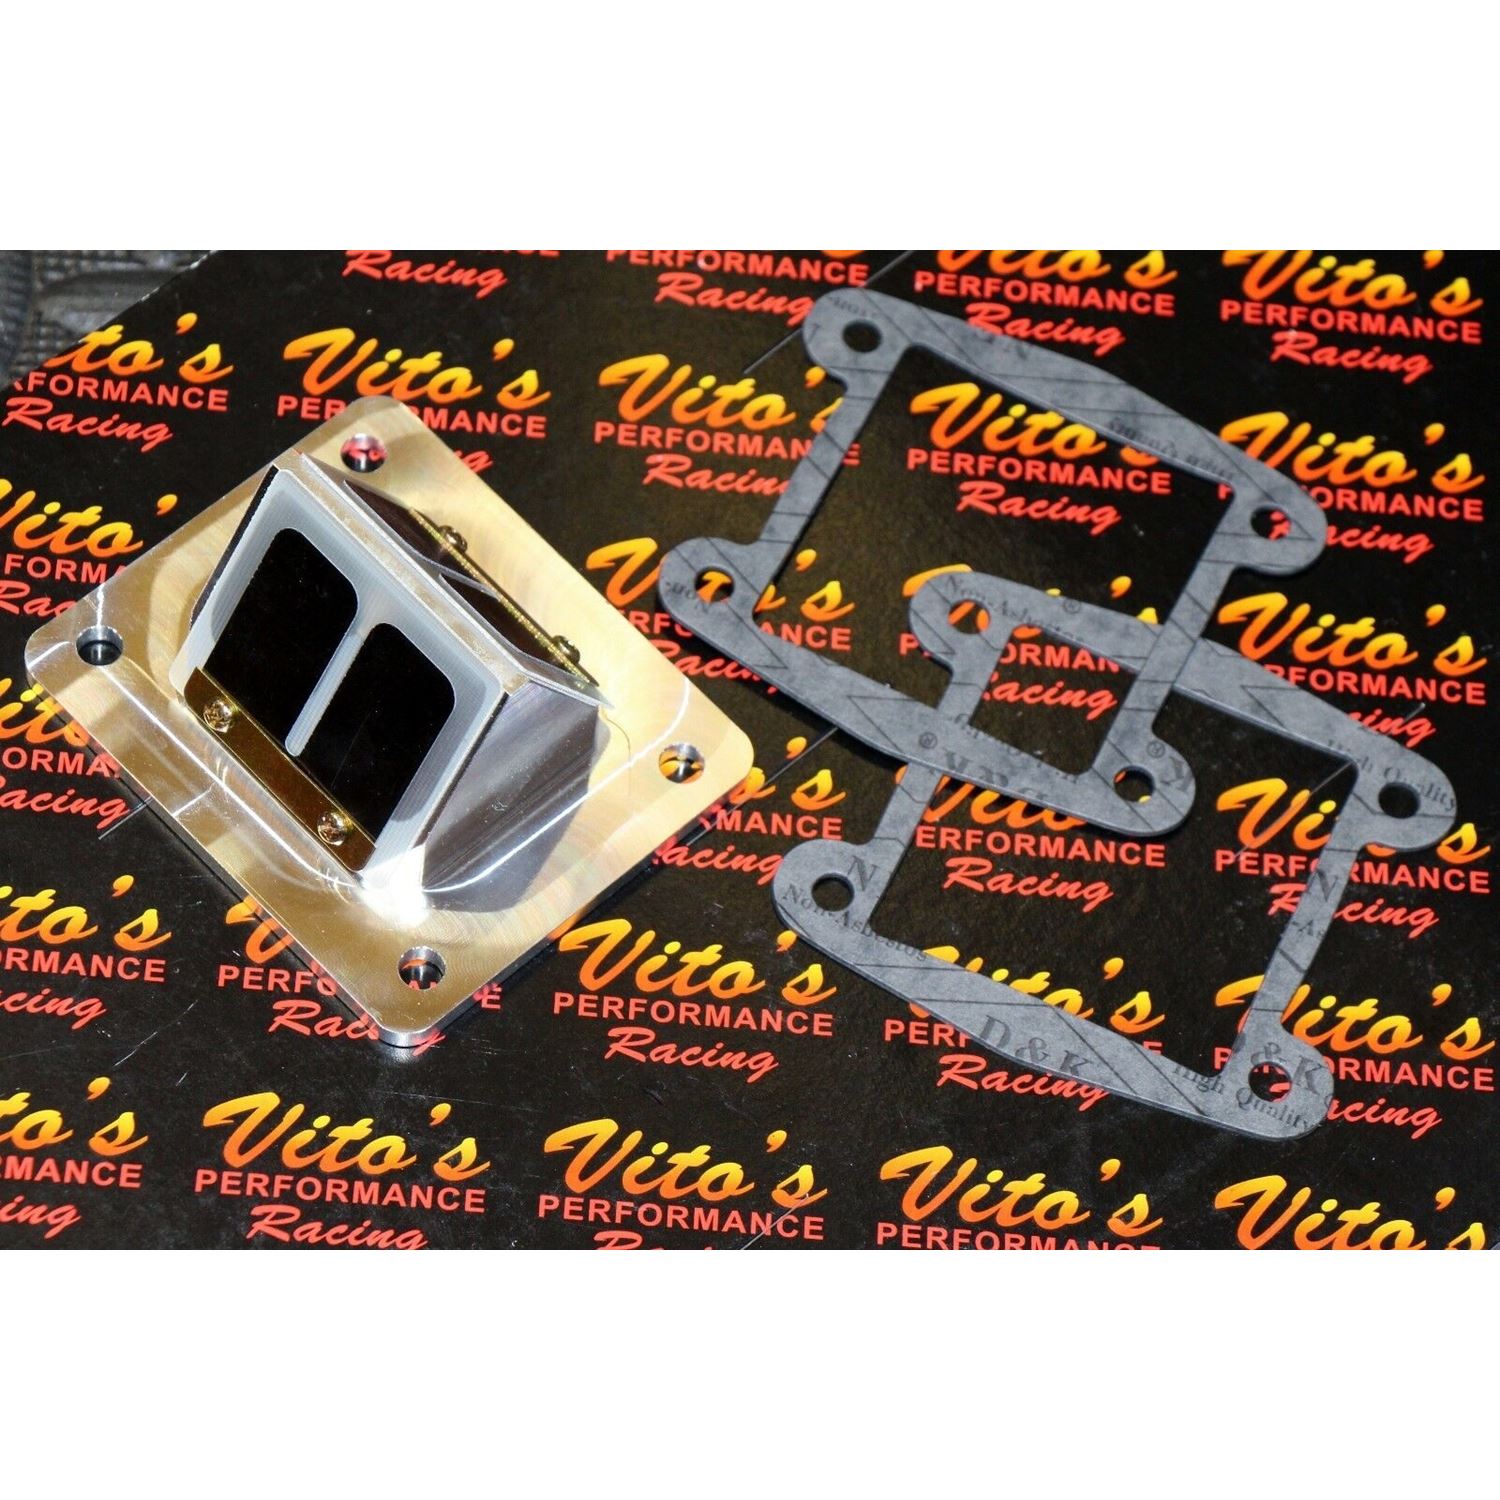 Vito's Performance billet BULLSEYE REED CAGES